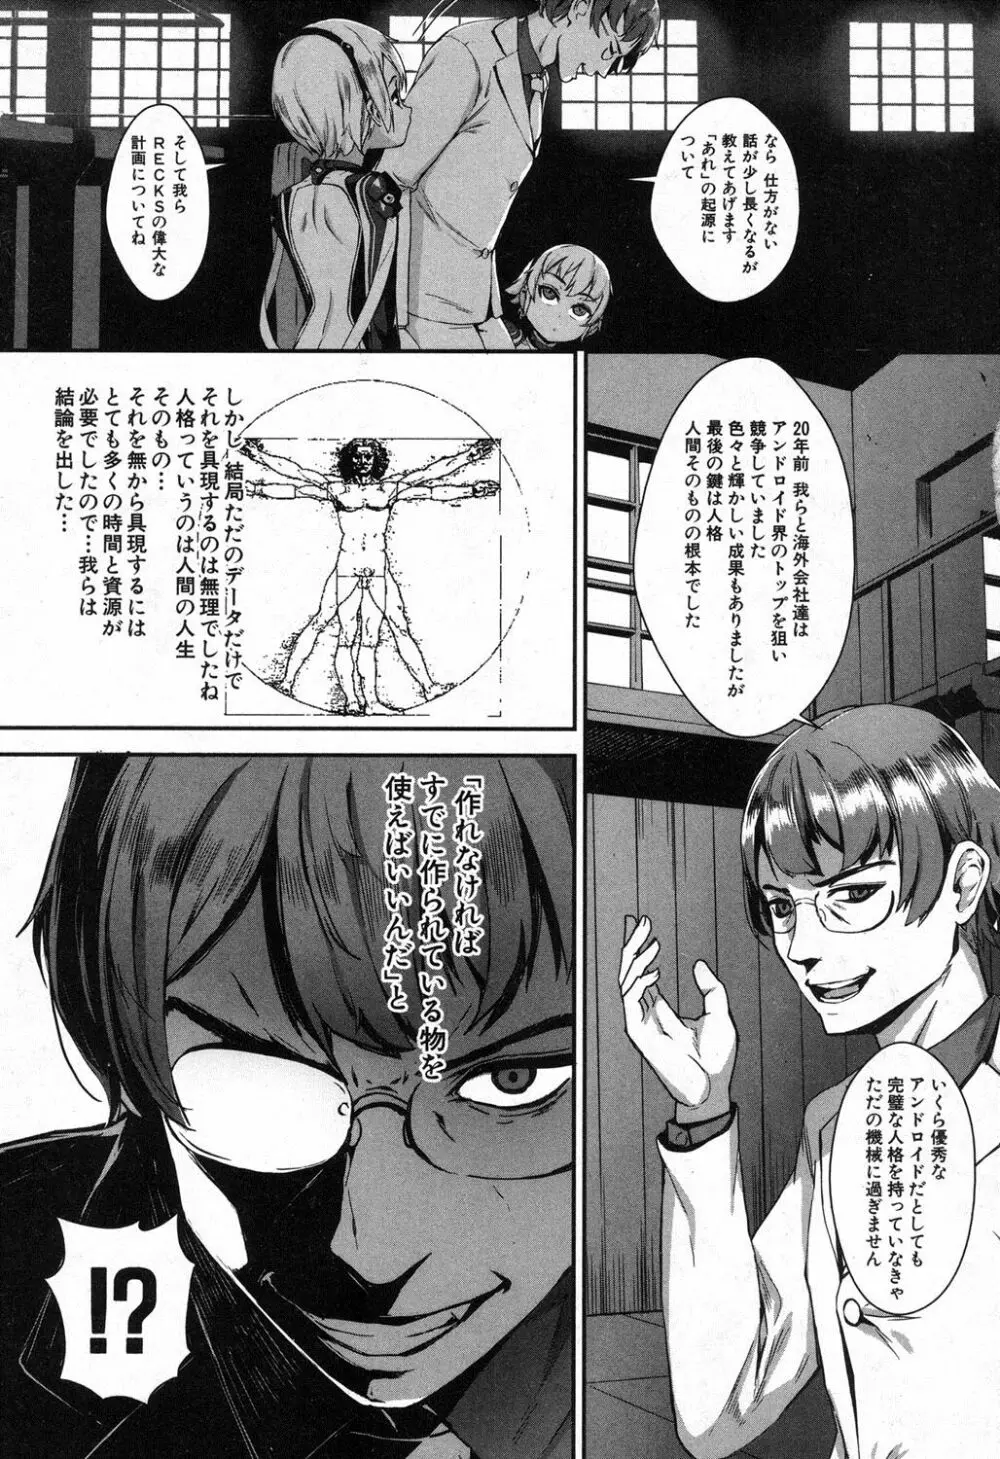 T.F.S 第1-4話 + 御負け PV Page.83